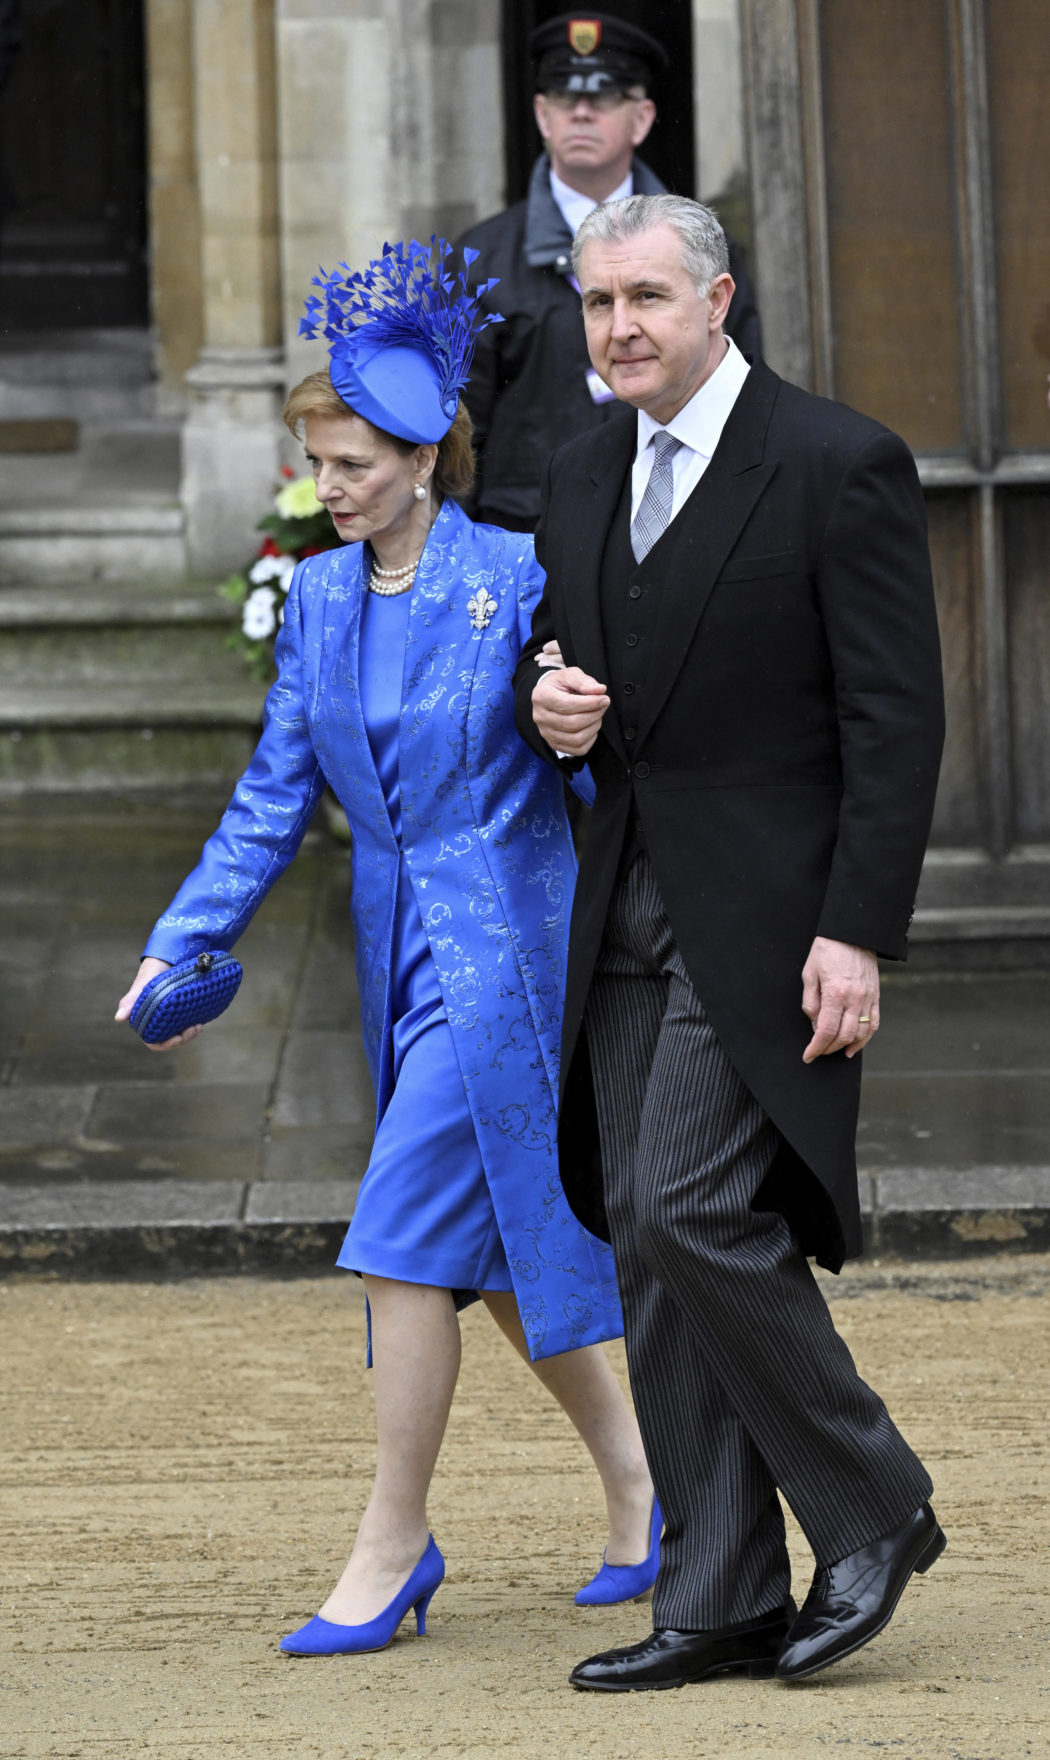 Prince Radu of Romania and Margareta of Romania arrive to attend Britain’s King Charles III and Camilla, the Queen Consort, coronation ceremony at Westminster Abbey, London, Saturday, May 6, 2023. (Toby Melville, Pool via AP)